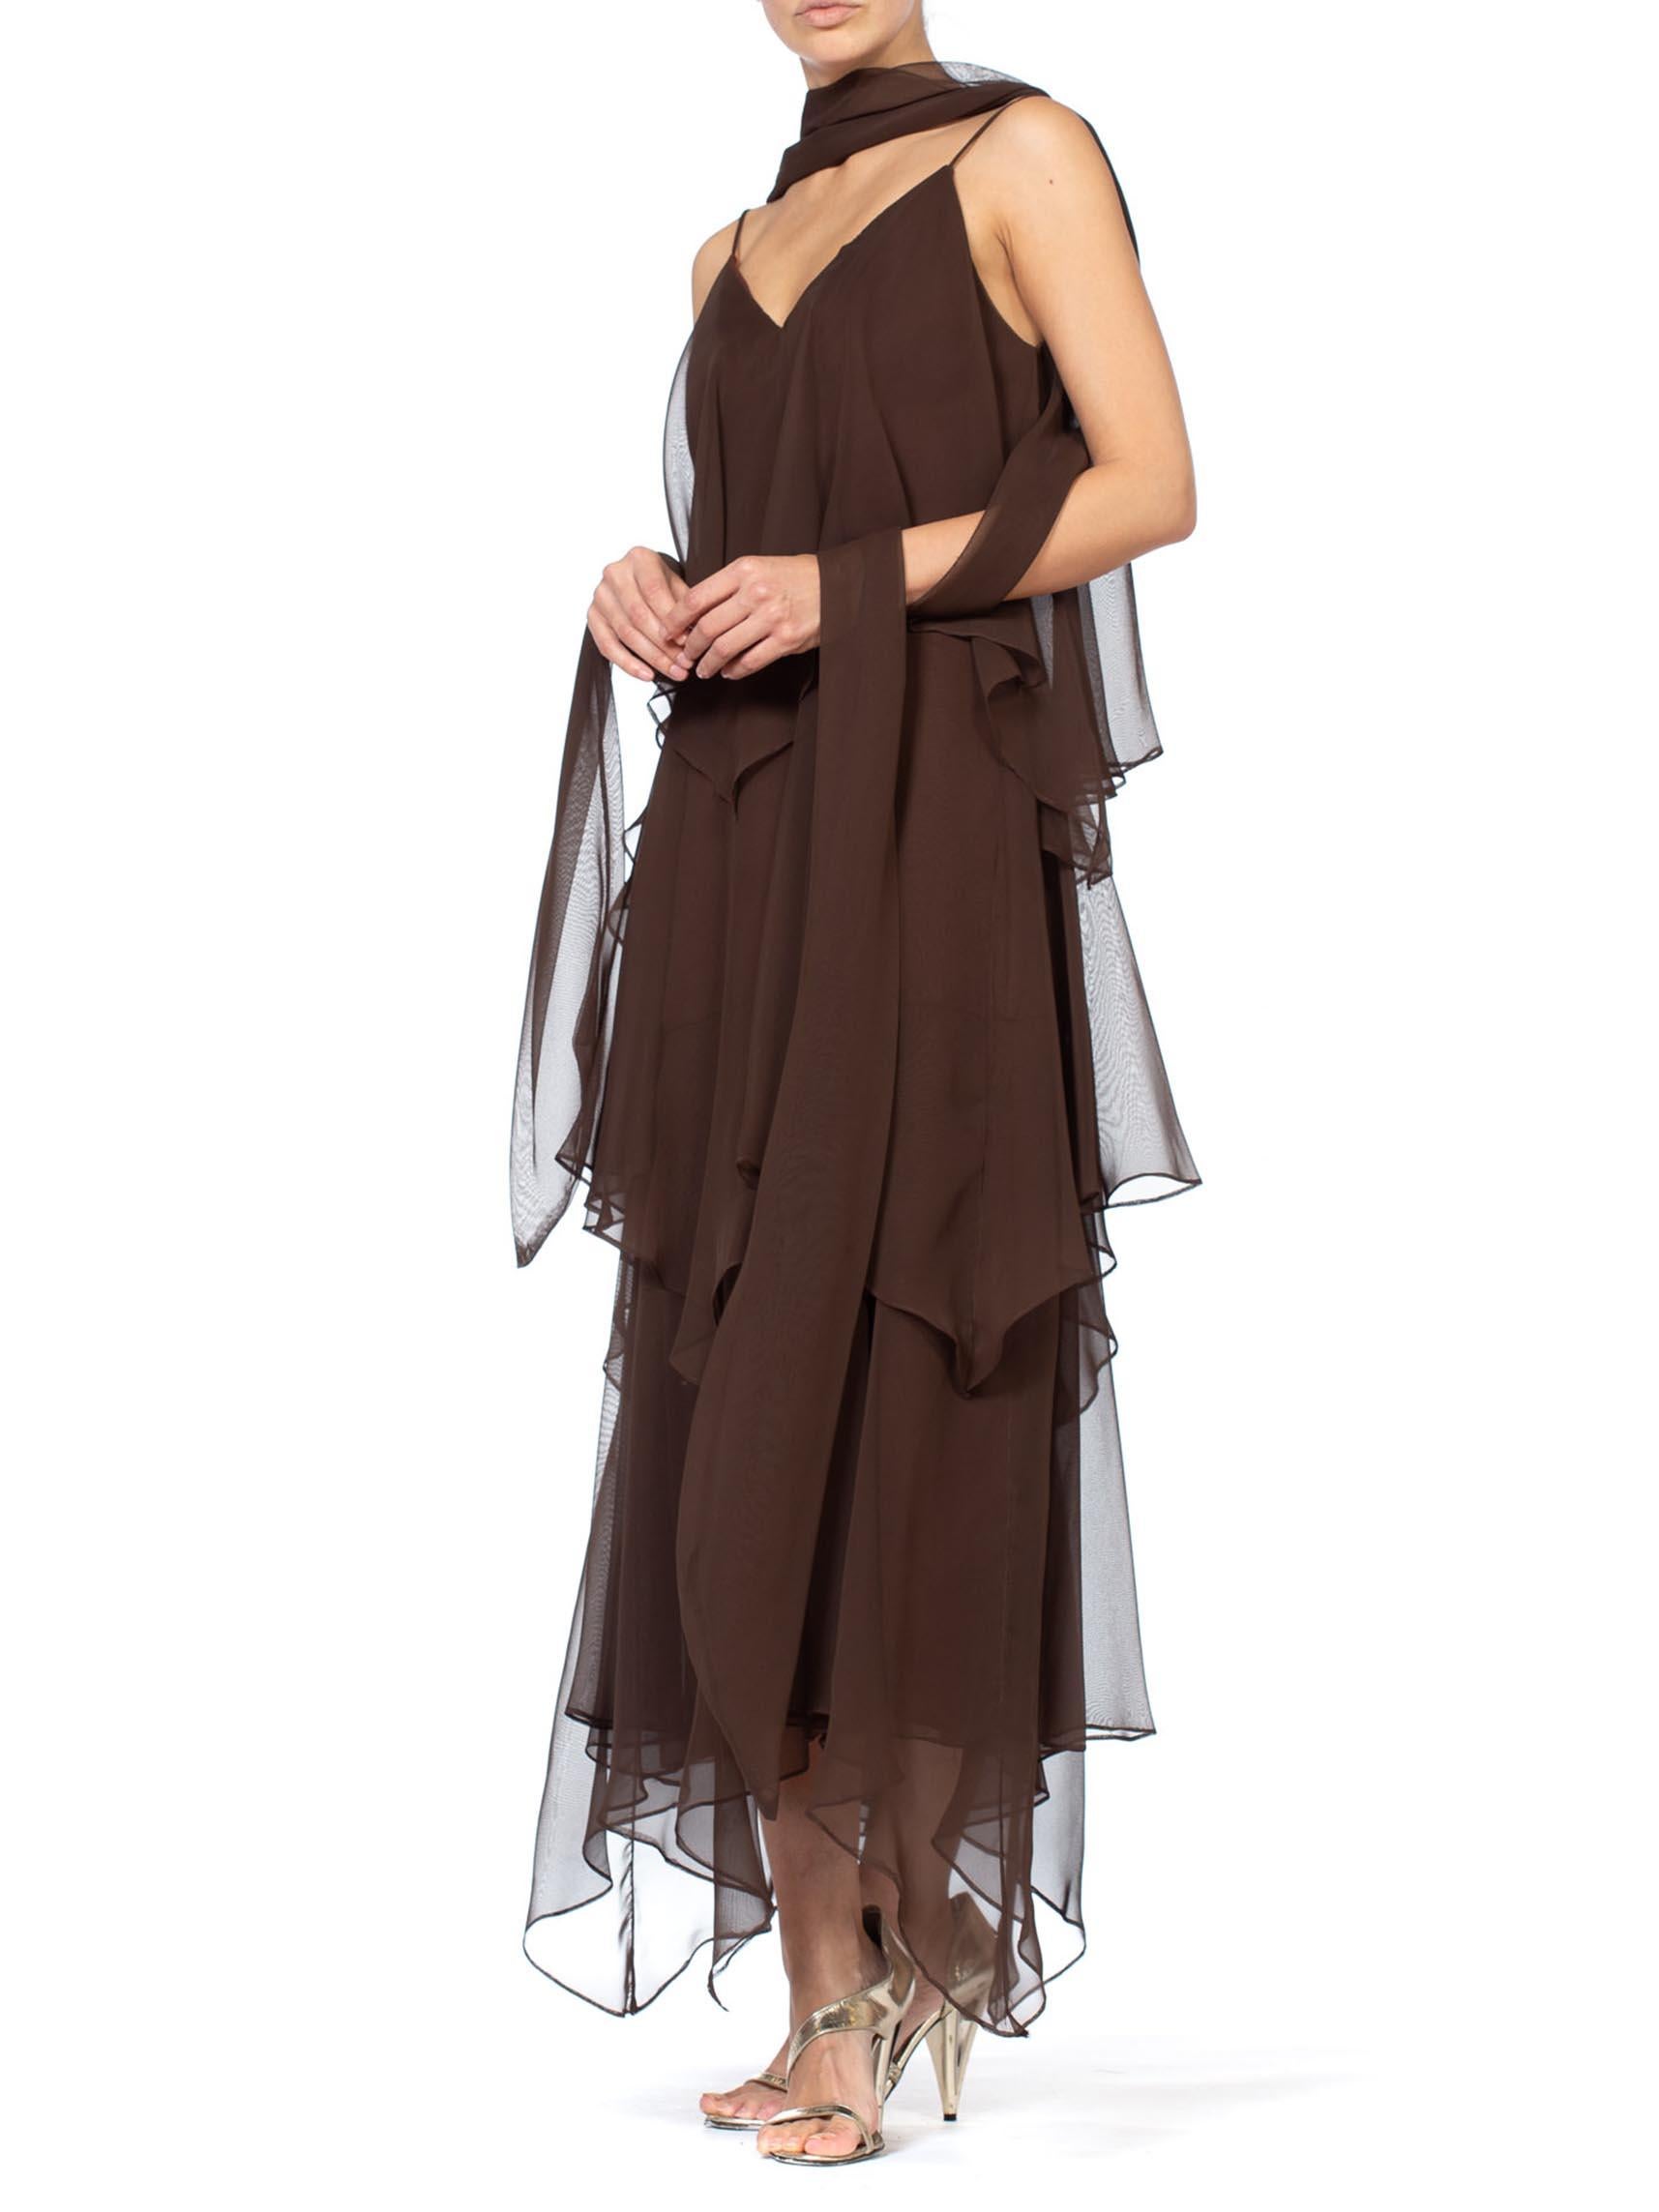 Women's 1970S ANTHONY MUTO Chocolate Brown Polyester Chiffon Disco Flapper Dress With S